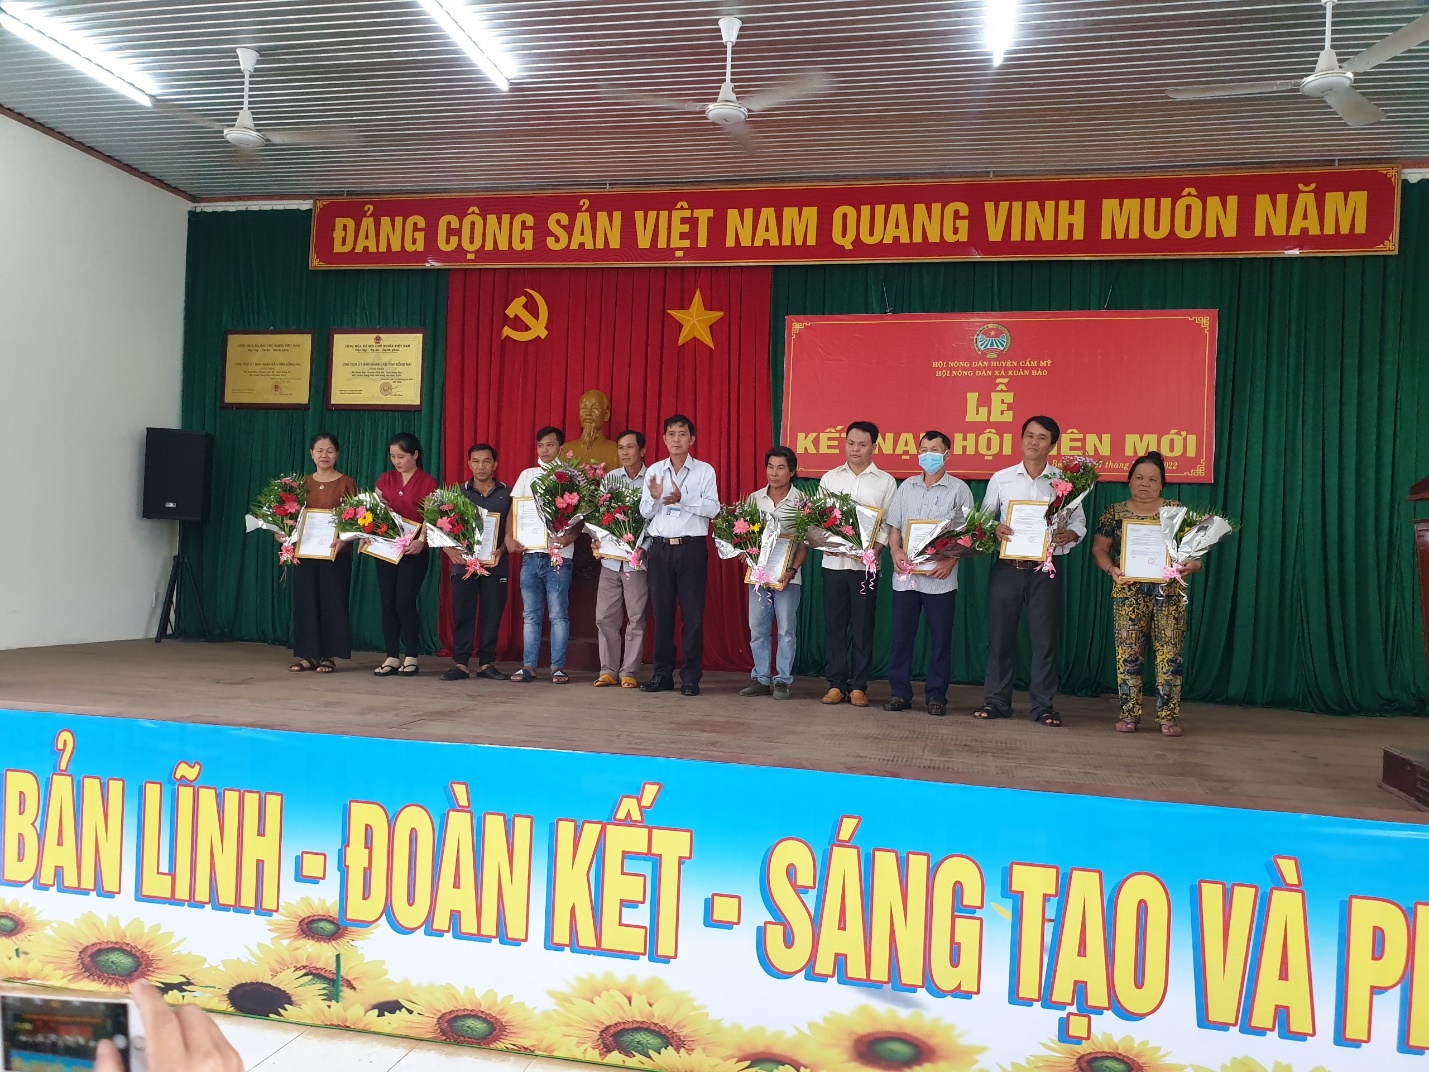 Every year, to strive to enroll 200,000 or more new farmer members in Vietnam